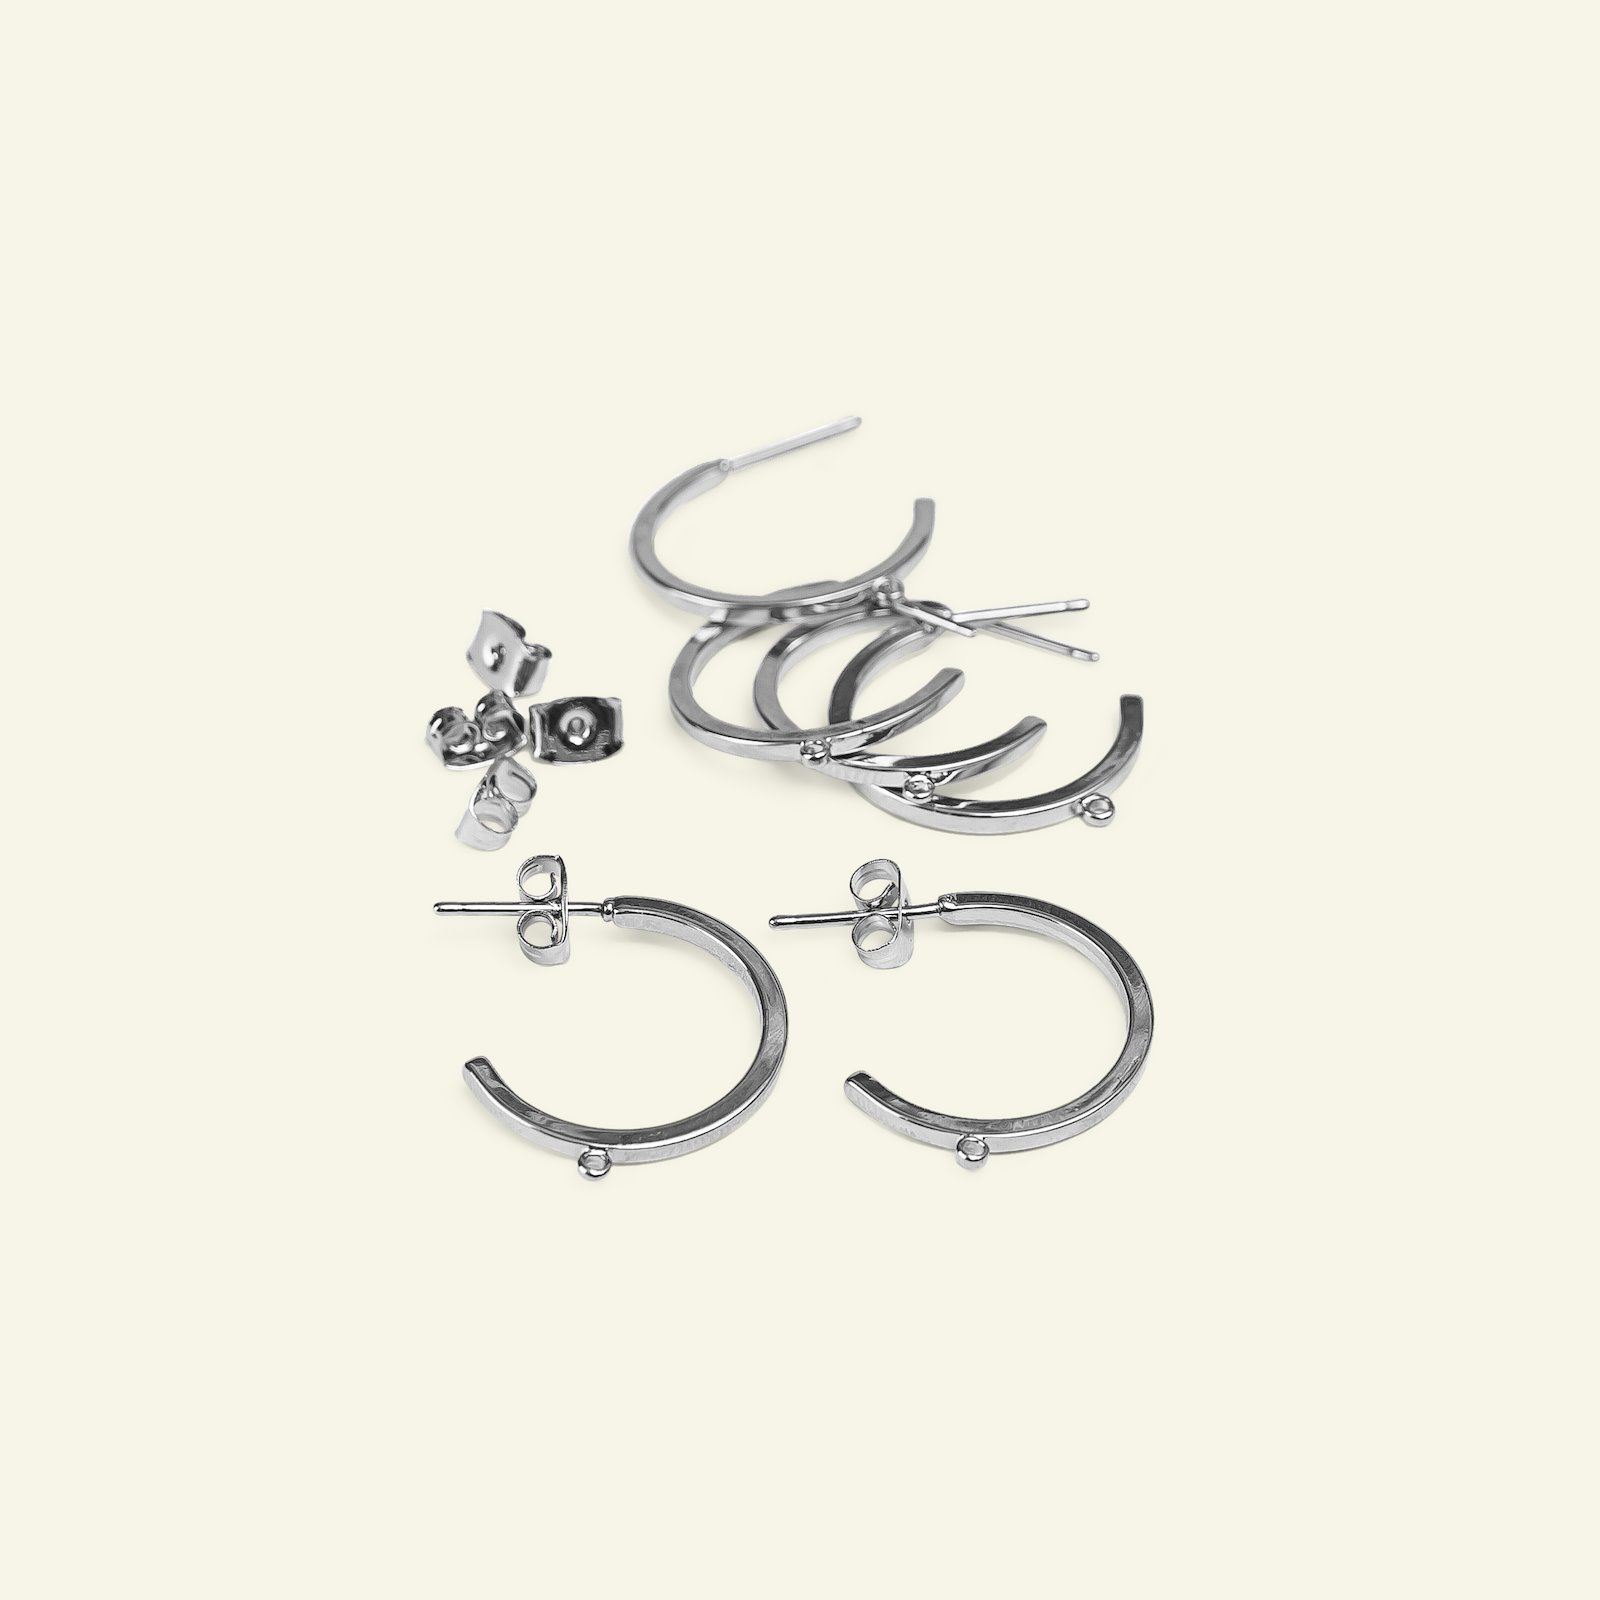 Ear ring hoops 21mm silver colored 6pcs 45381_pack